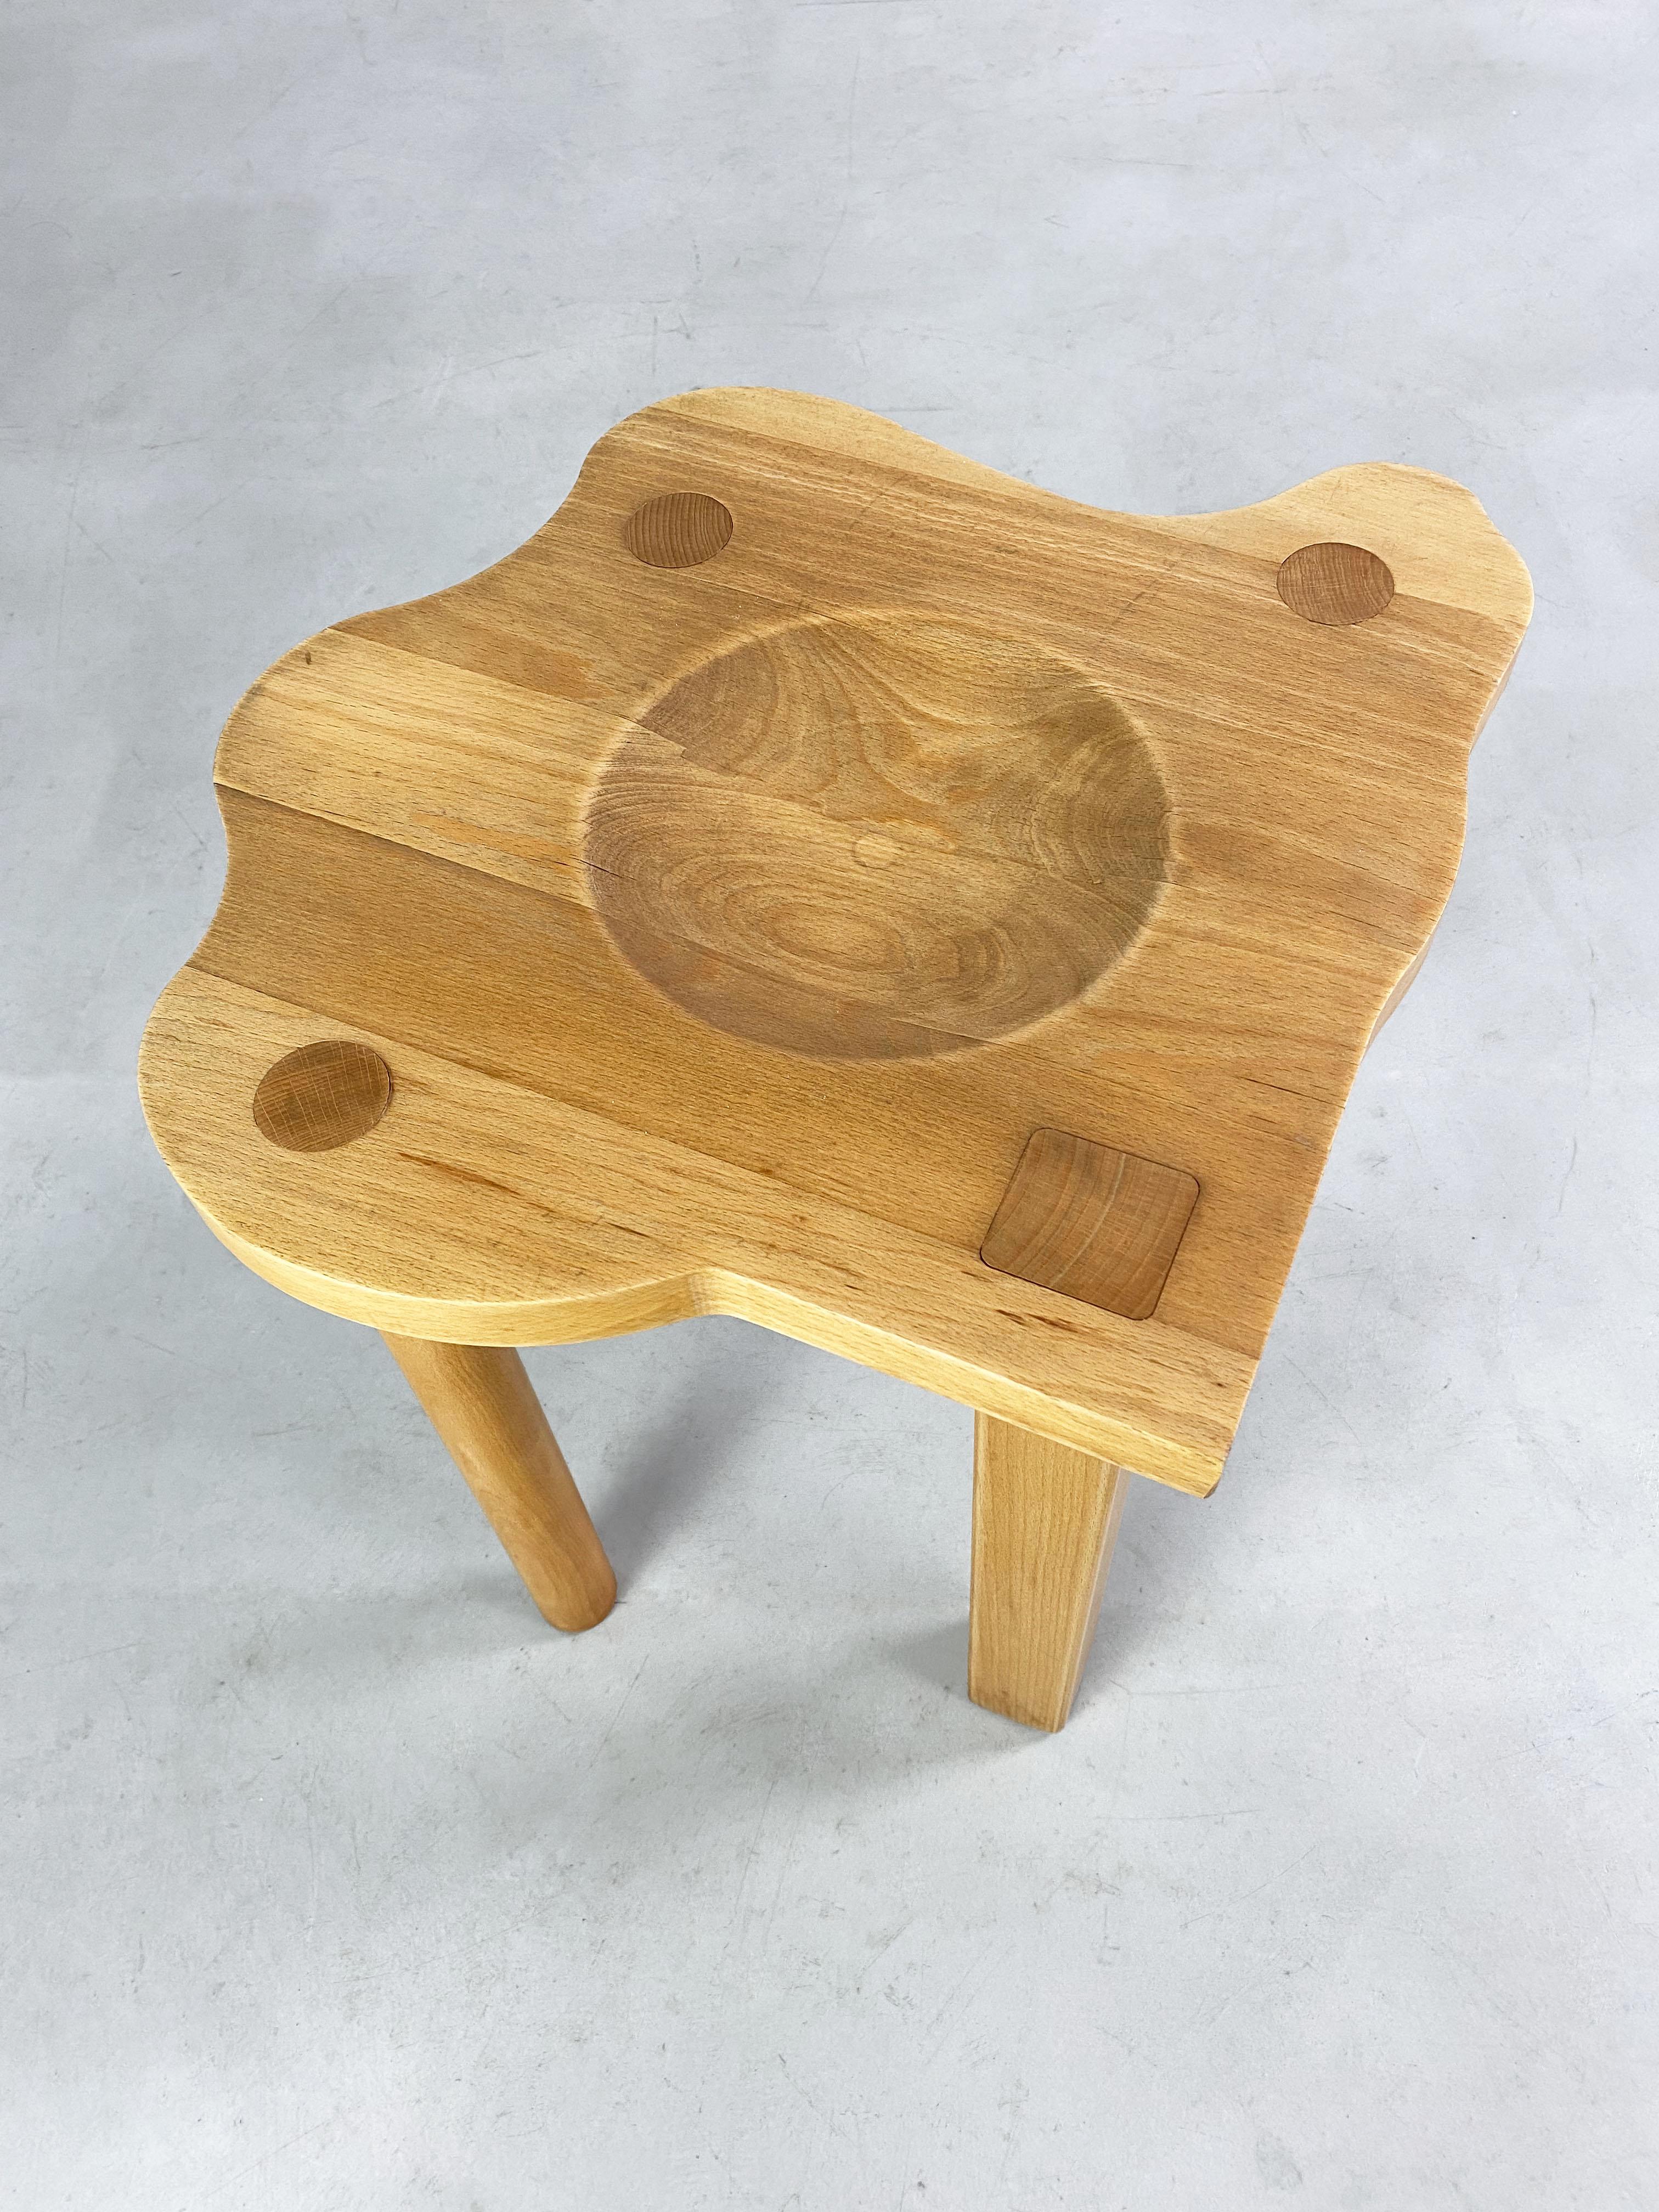 Late 20th Century Postmodern Oak Stool by E.R.A Herbst, Germany, c.1990